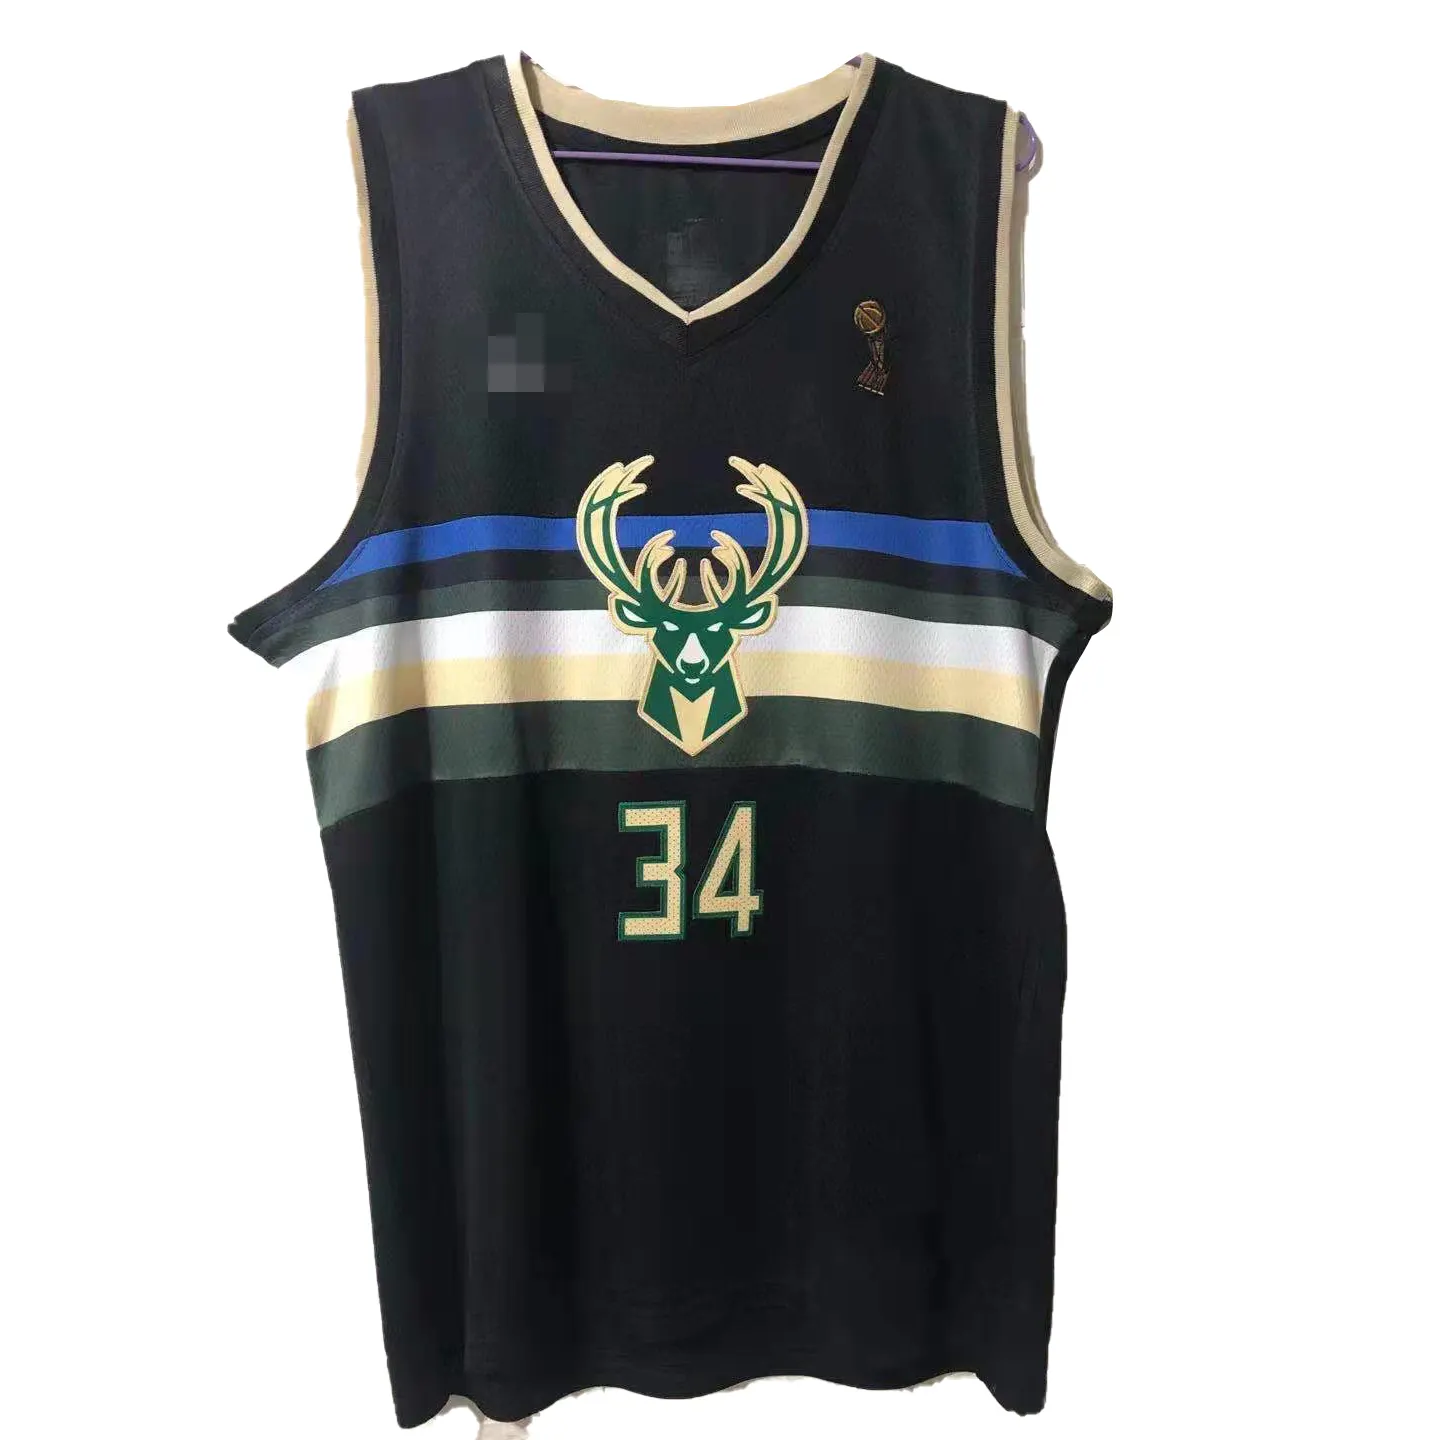 Bucks #34 Champs Embroidered Basketball Wear Stitched Mesh Basketball Jersey New Arrive Various Basketball Uniform